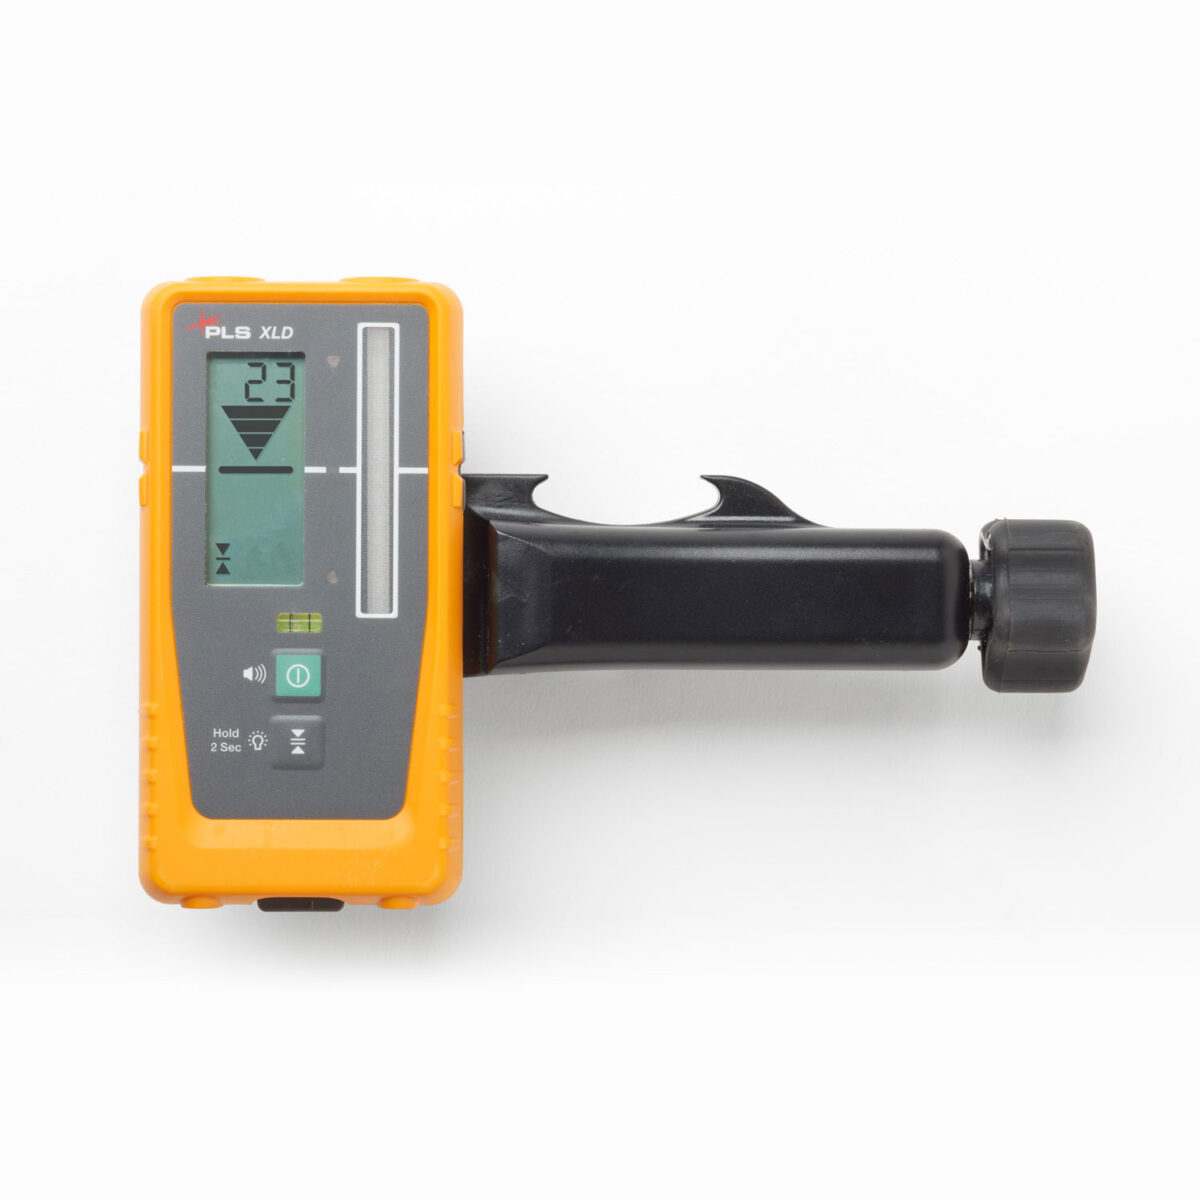 PLS XLD - Laser Detector with Clamp